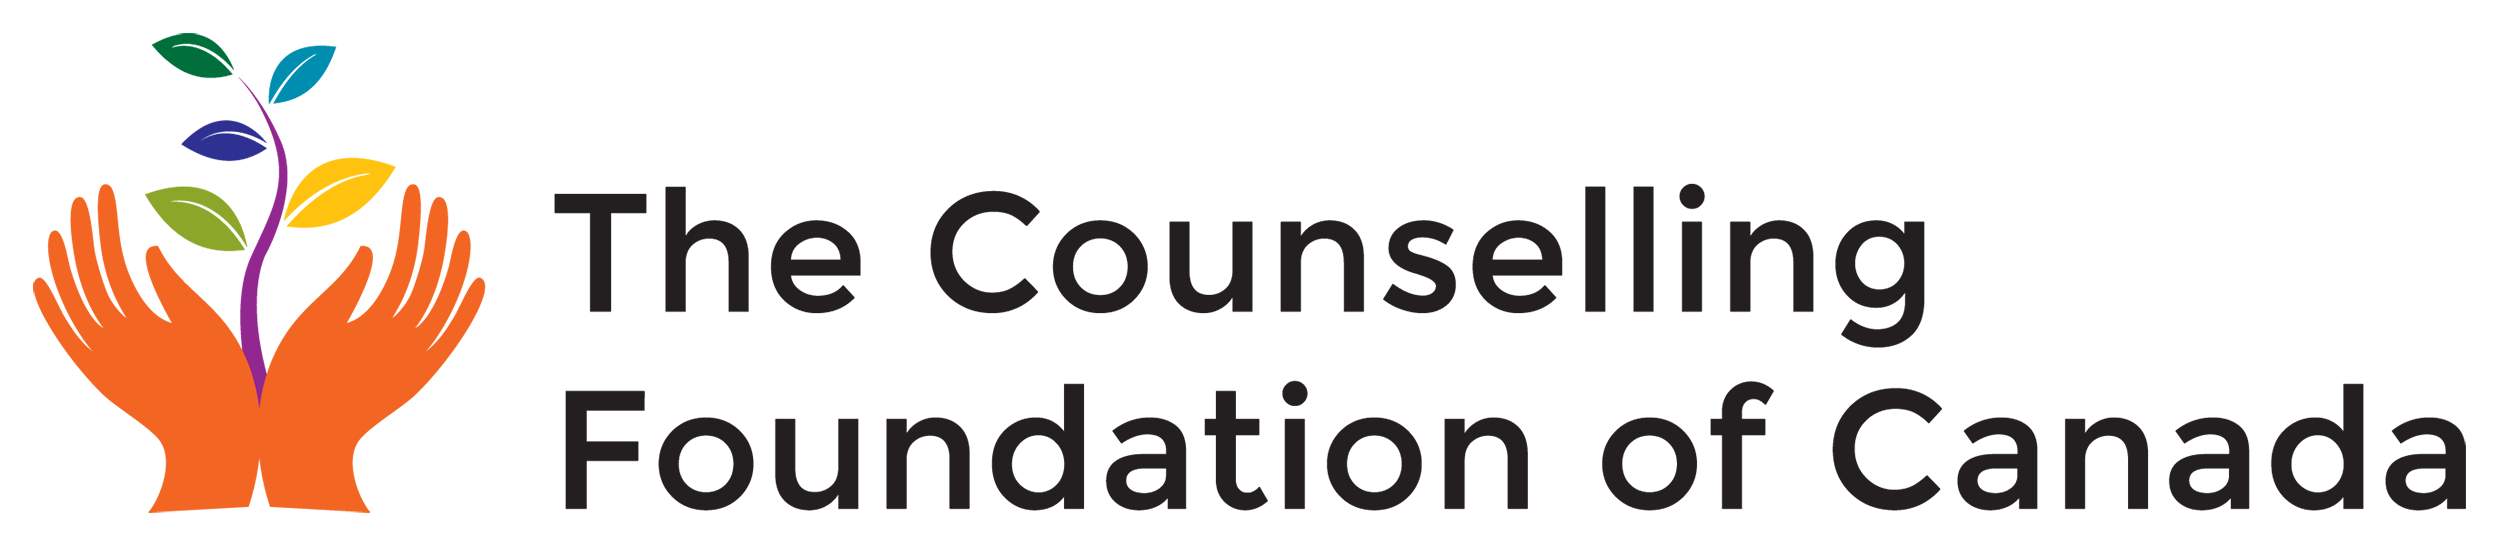 The Counselling Foundation of Canada logo